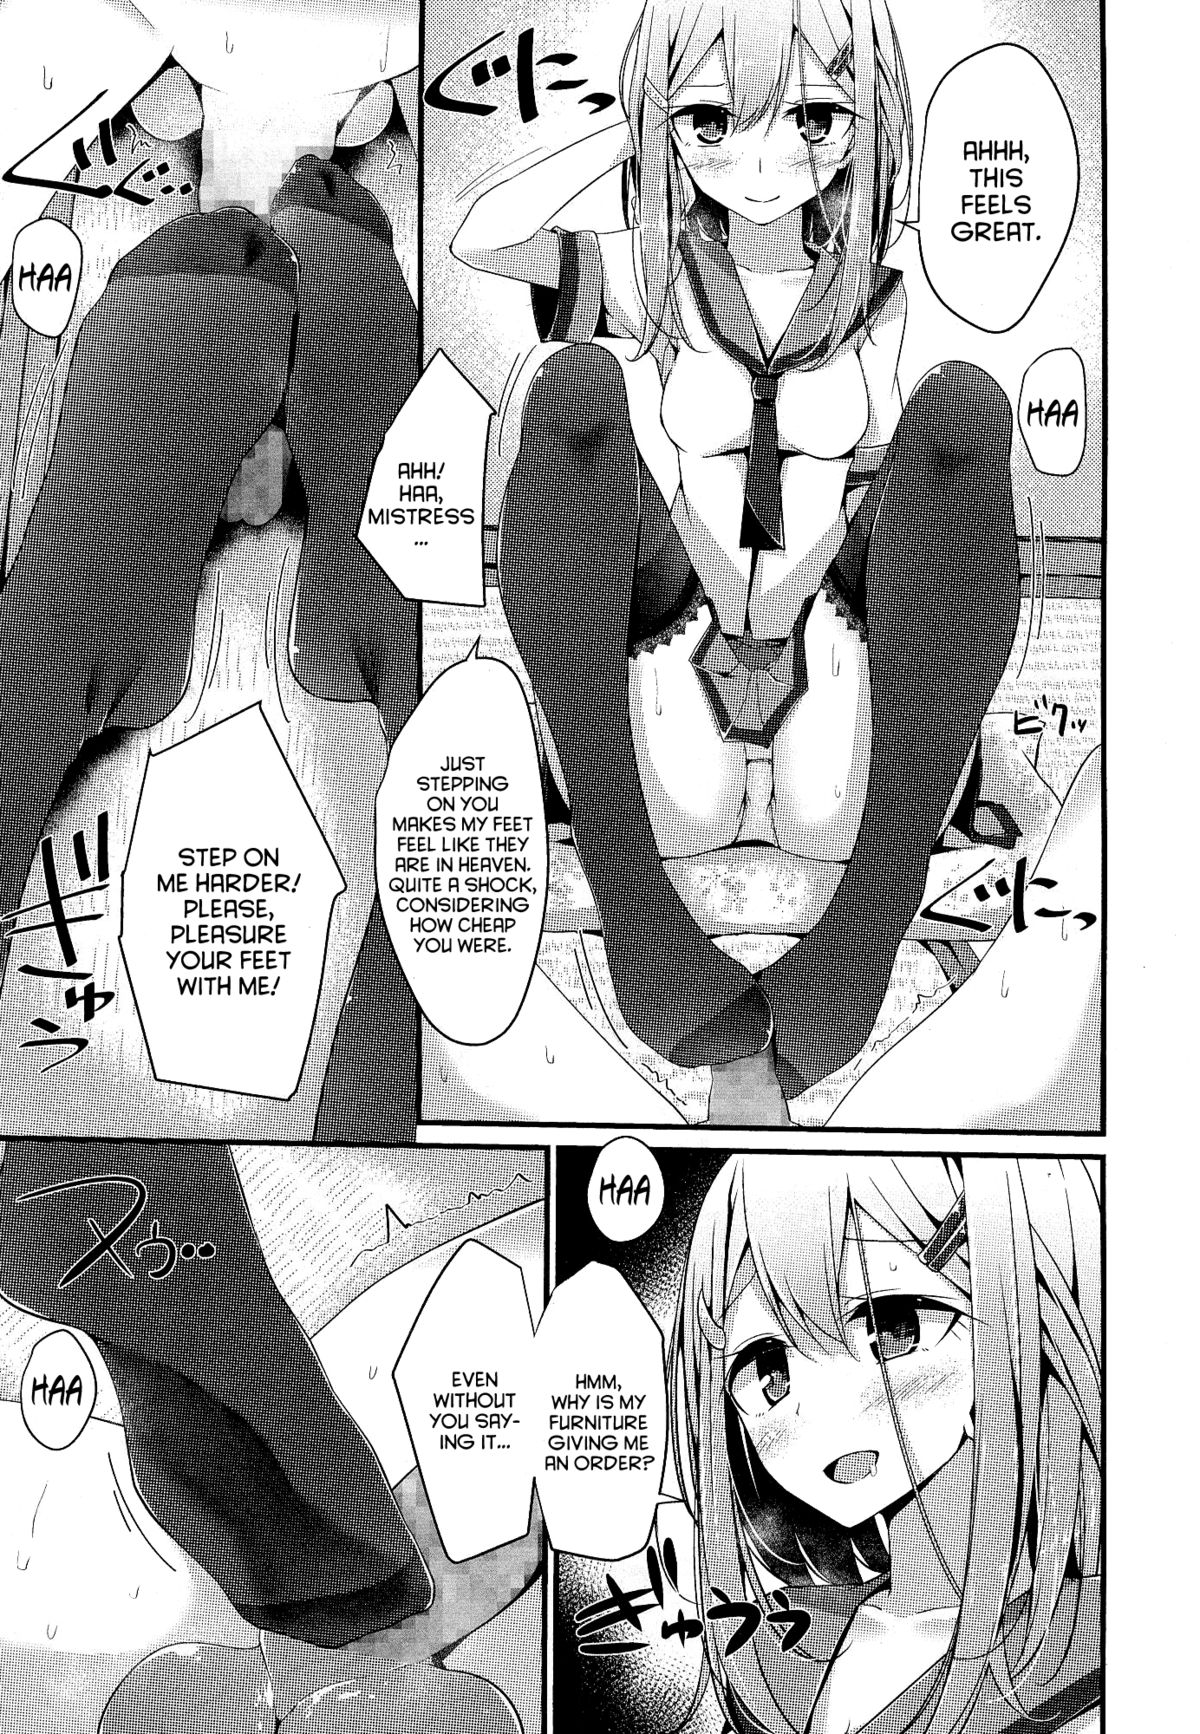 [Oouso] Olfactophilia -Side Story- (Girls forM Vol. 07) [English] =LWB= page 5 full